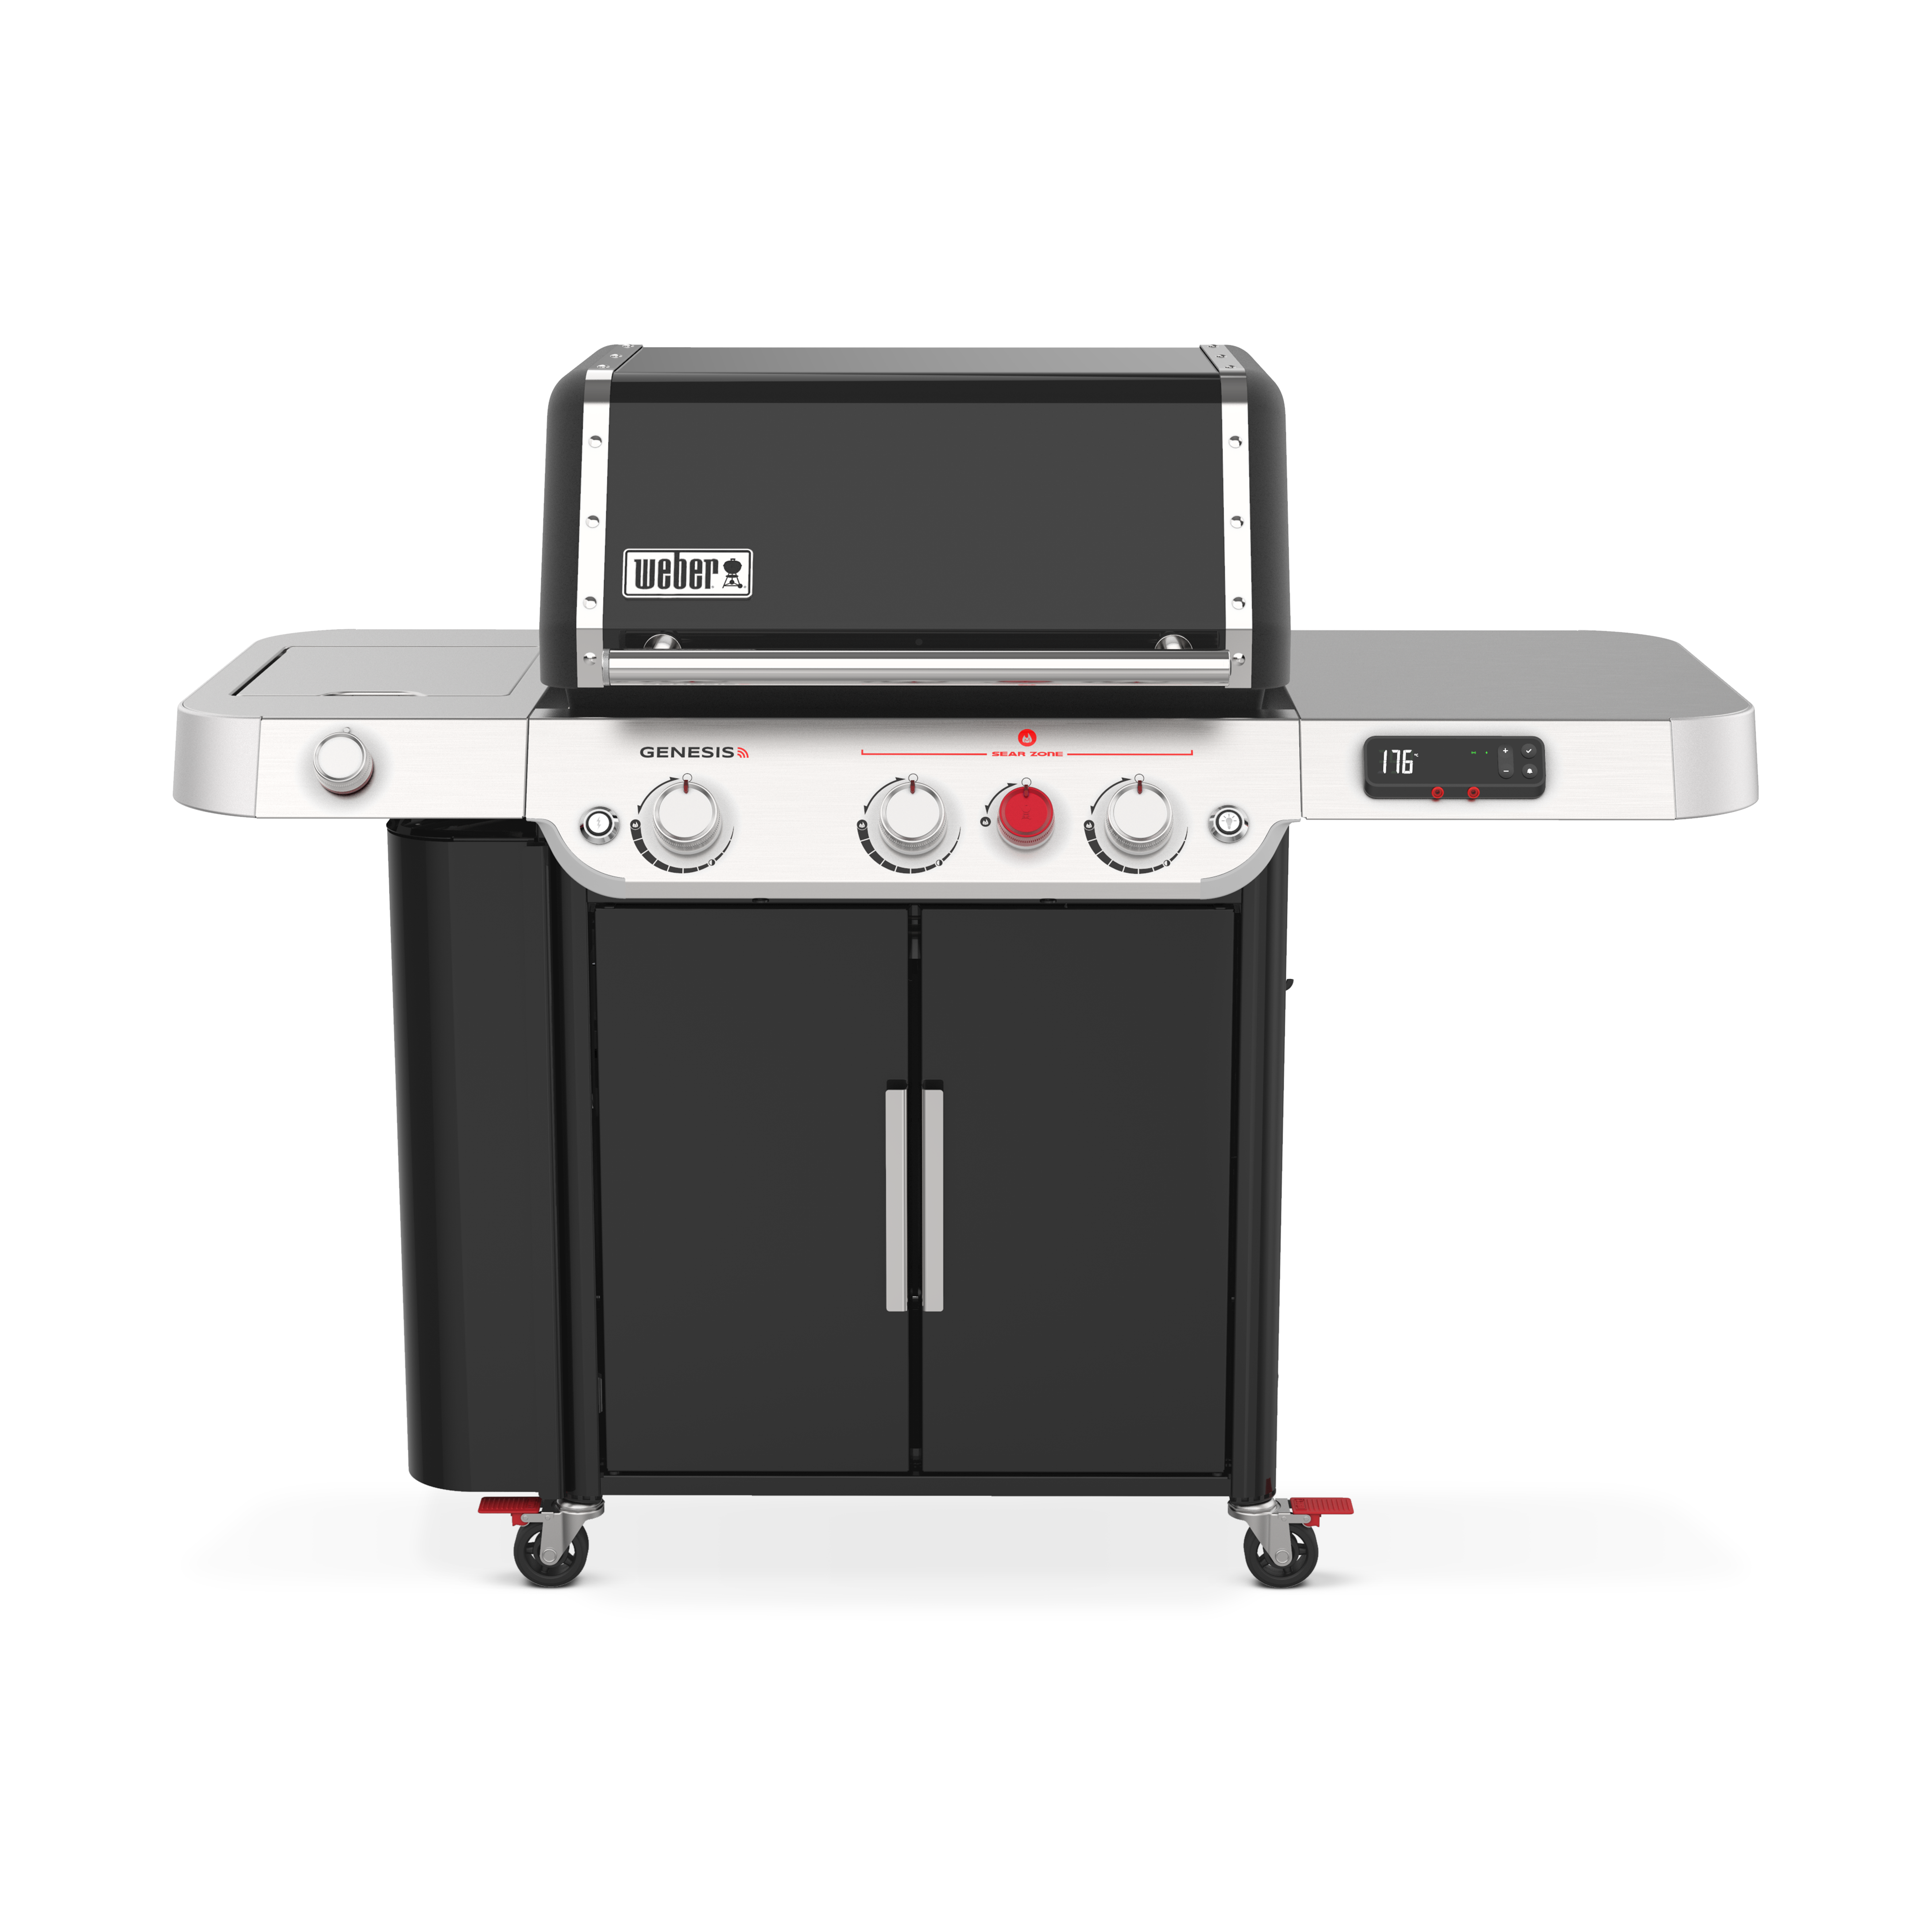 WEBER Gasgrill Genesis EPX-335 Smart Grill